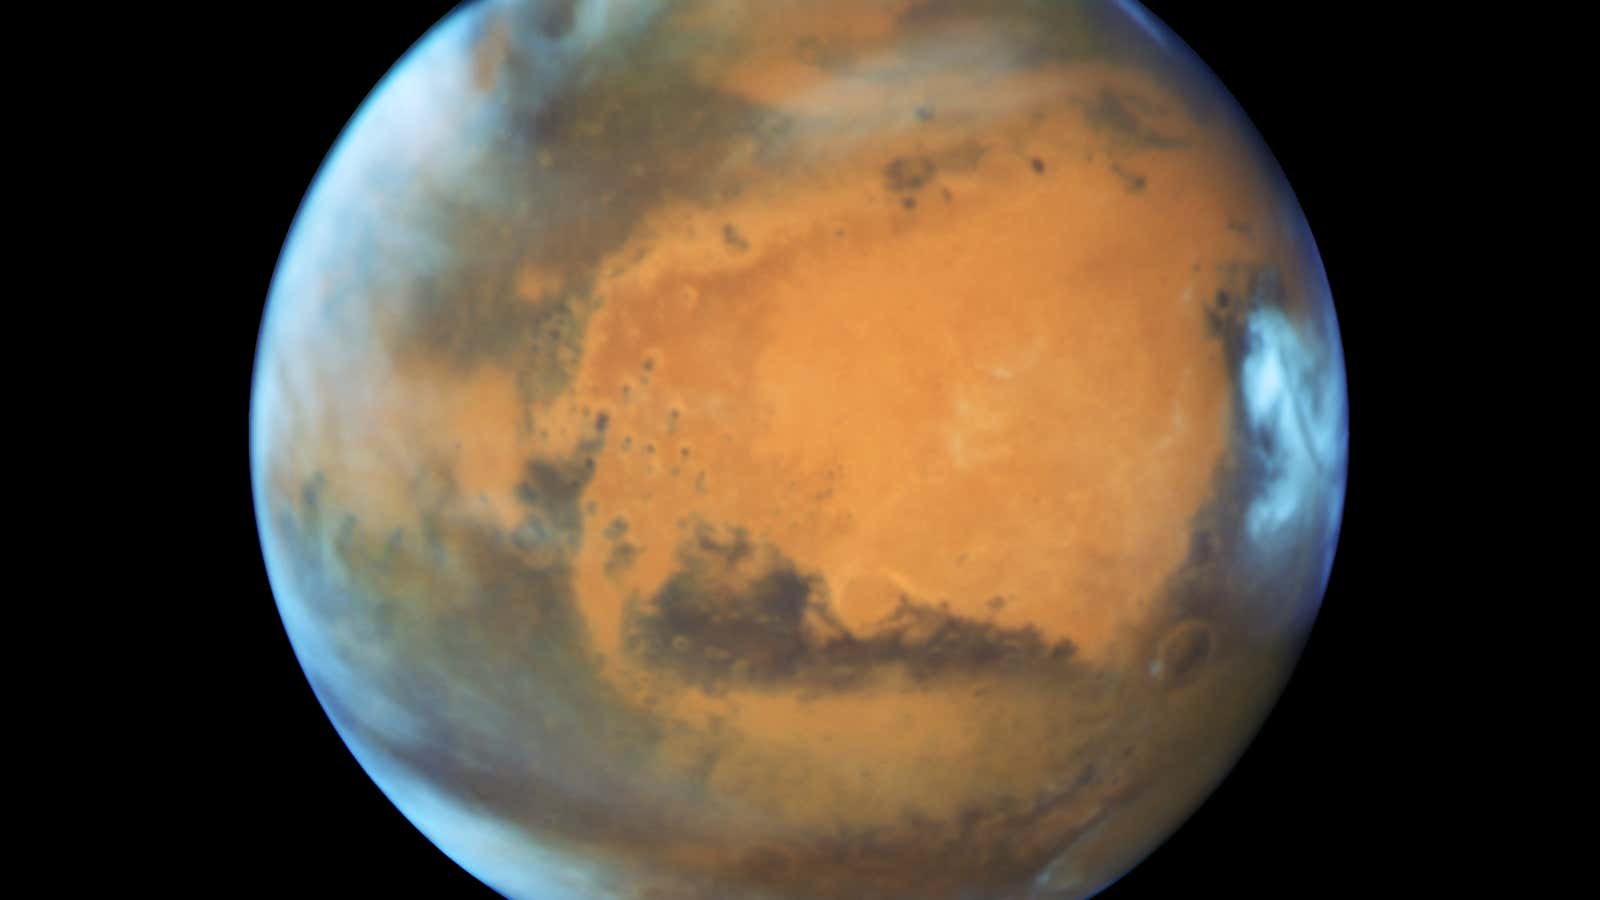 Mars, seen from the Hubble Space Telescope on May 12th.